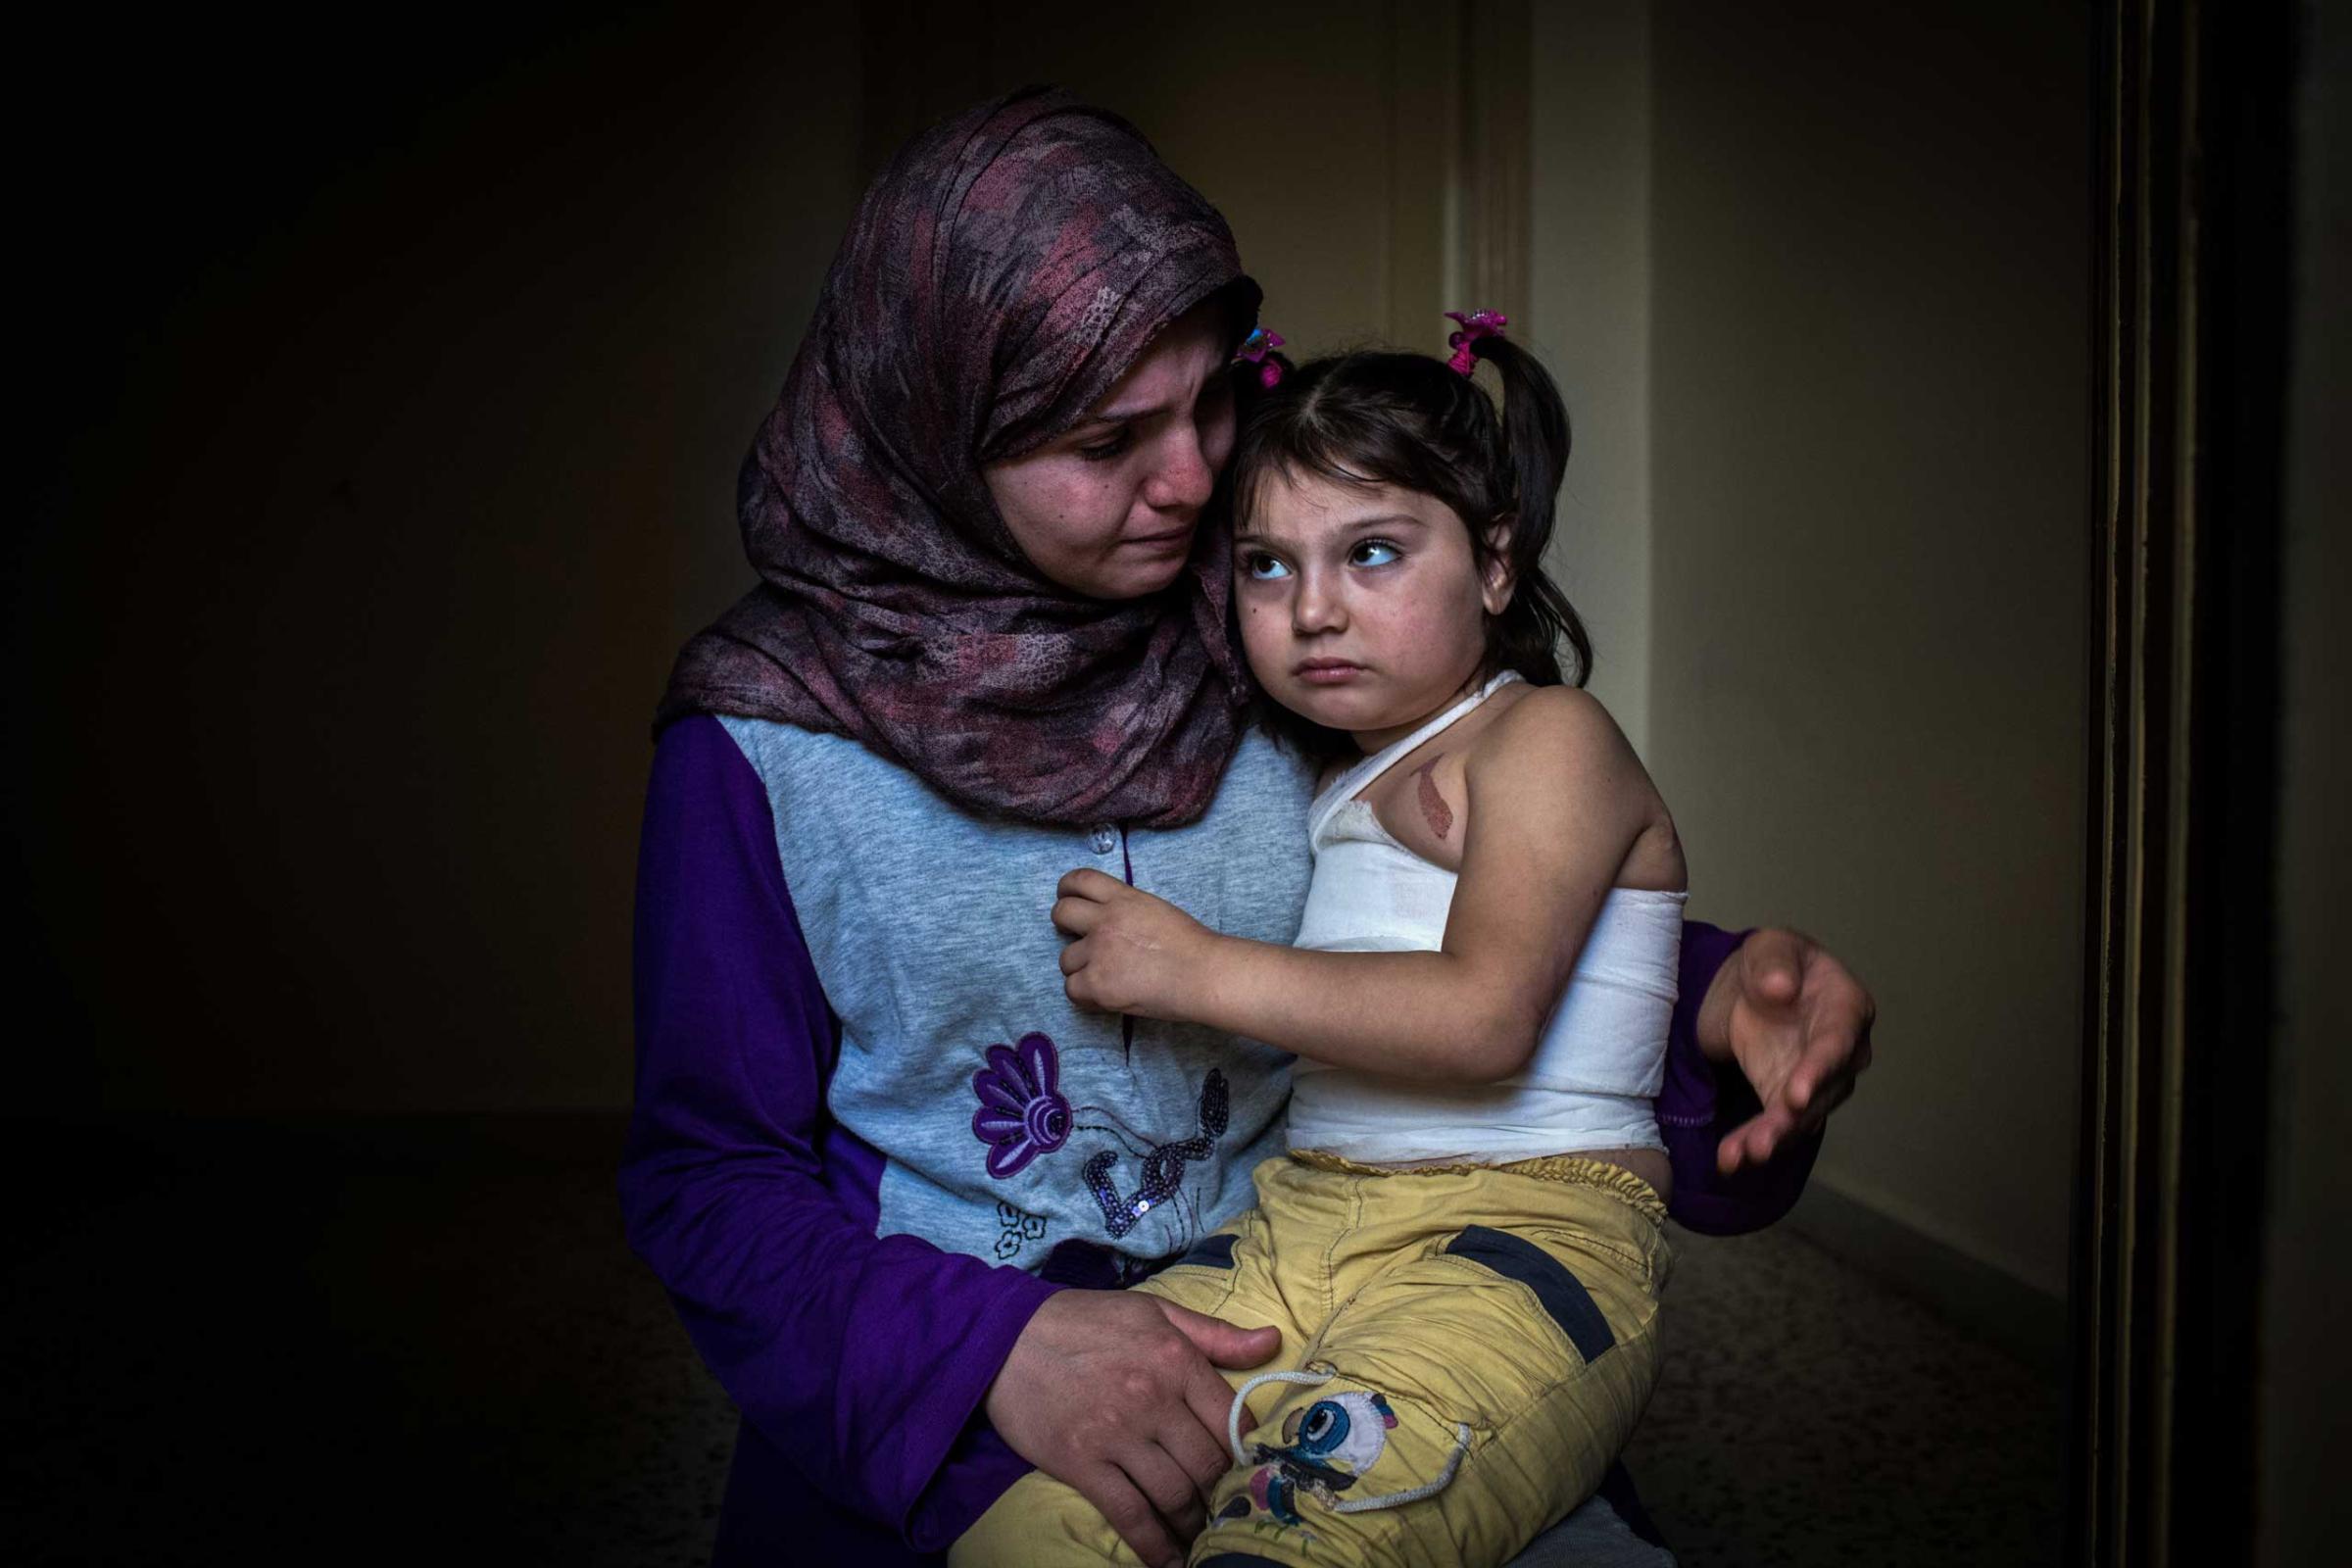 Yemen, 5, and her mother at home in northern Lebanon, on June 27, 2014. The girl was scalded by boiling water as bombs fell close to her home in November. Her mother carried her to Lebanon days later and said she'll need plastic surgery.